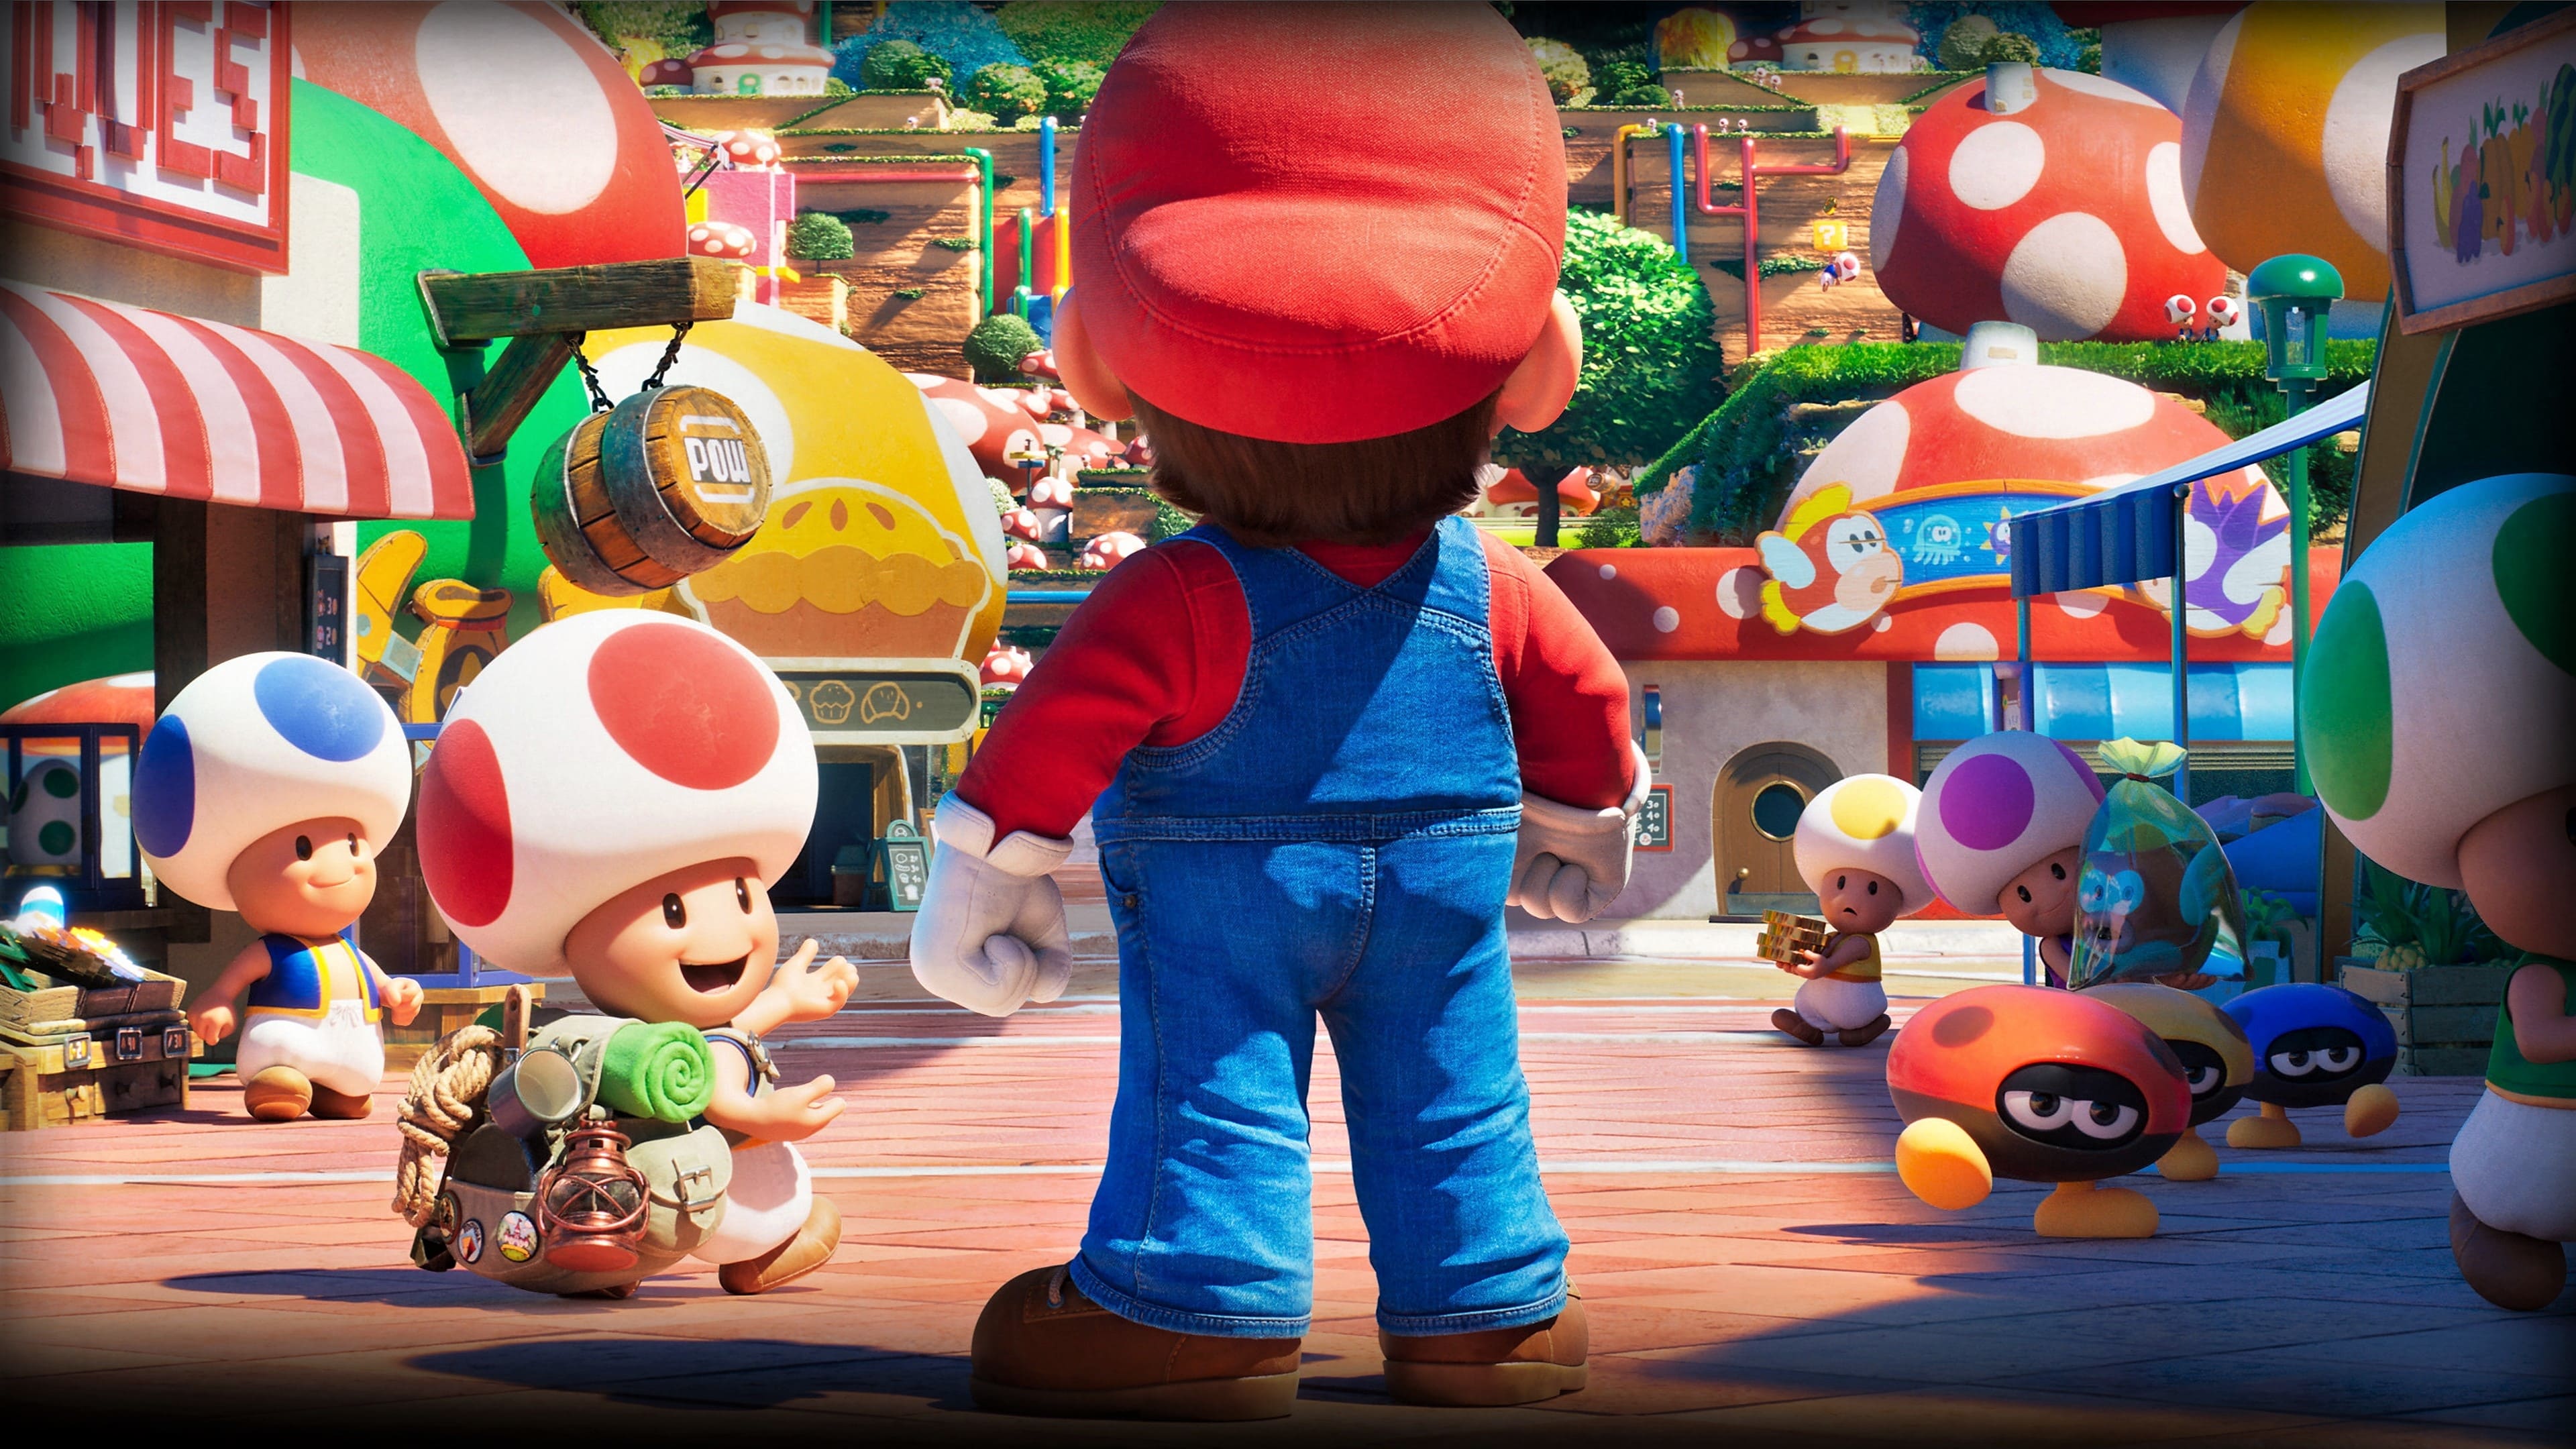 Super Mario Bros.: The Movie has advanced its release date in some territories